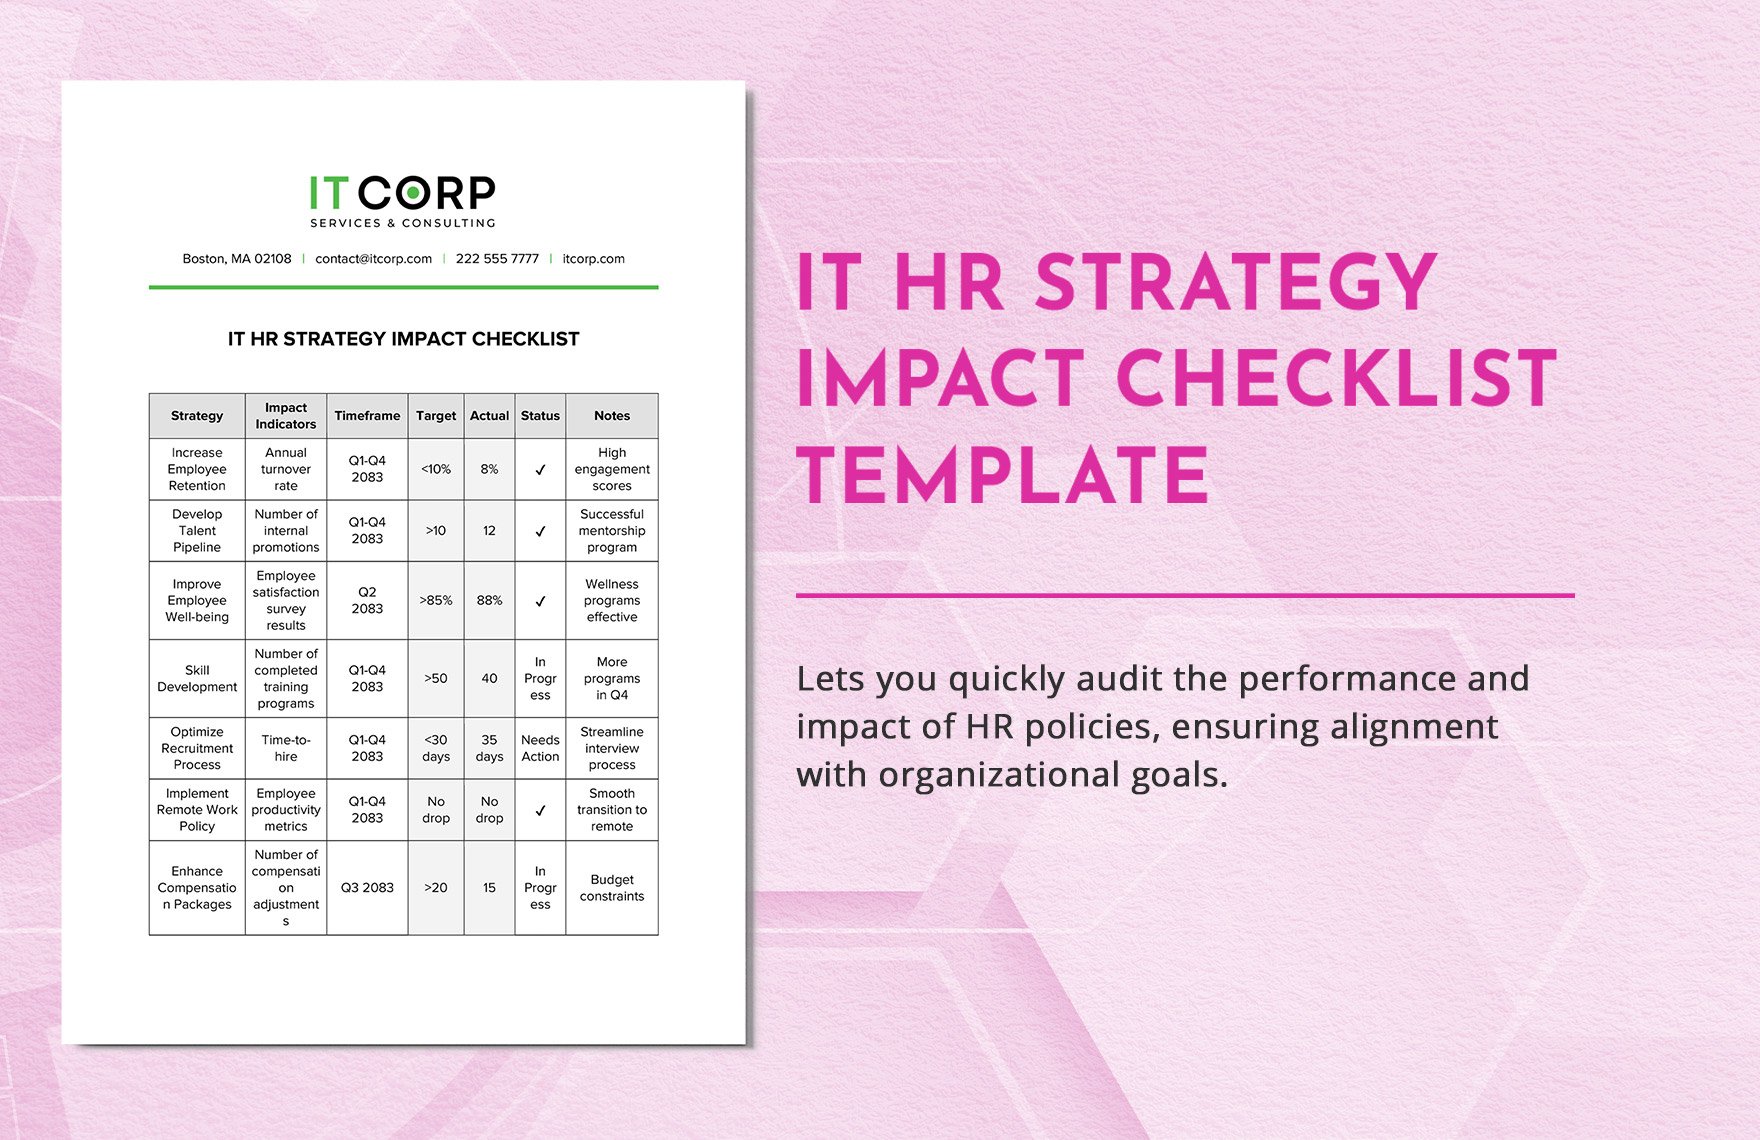 IT HR Strategy Impact Checklist Template